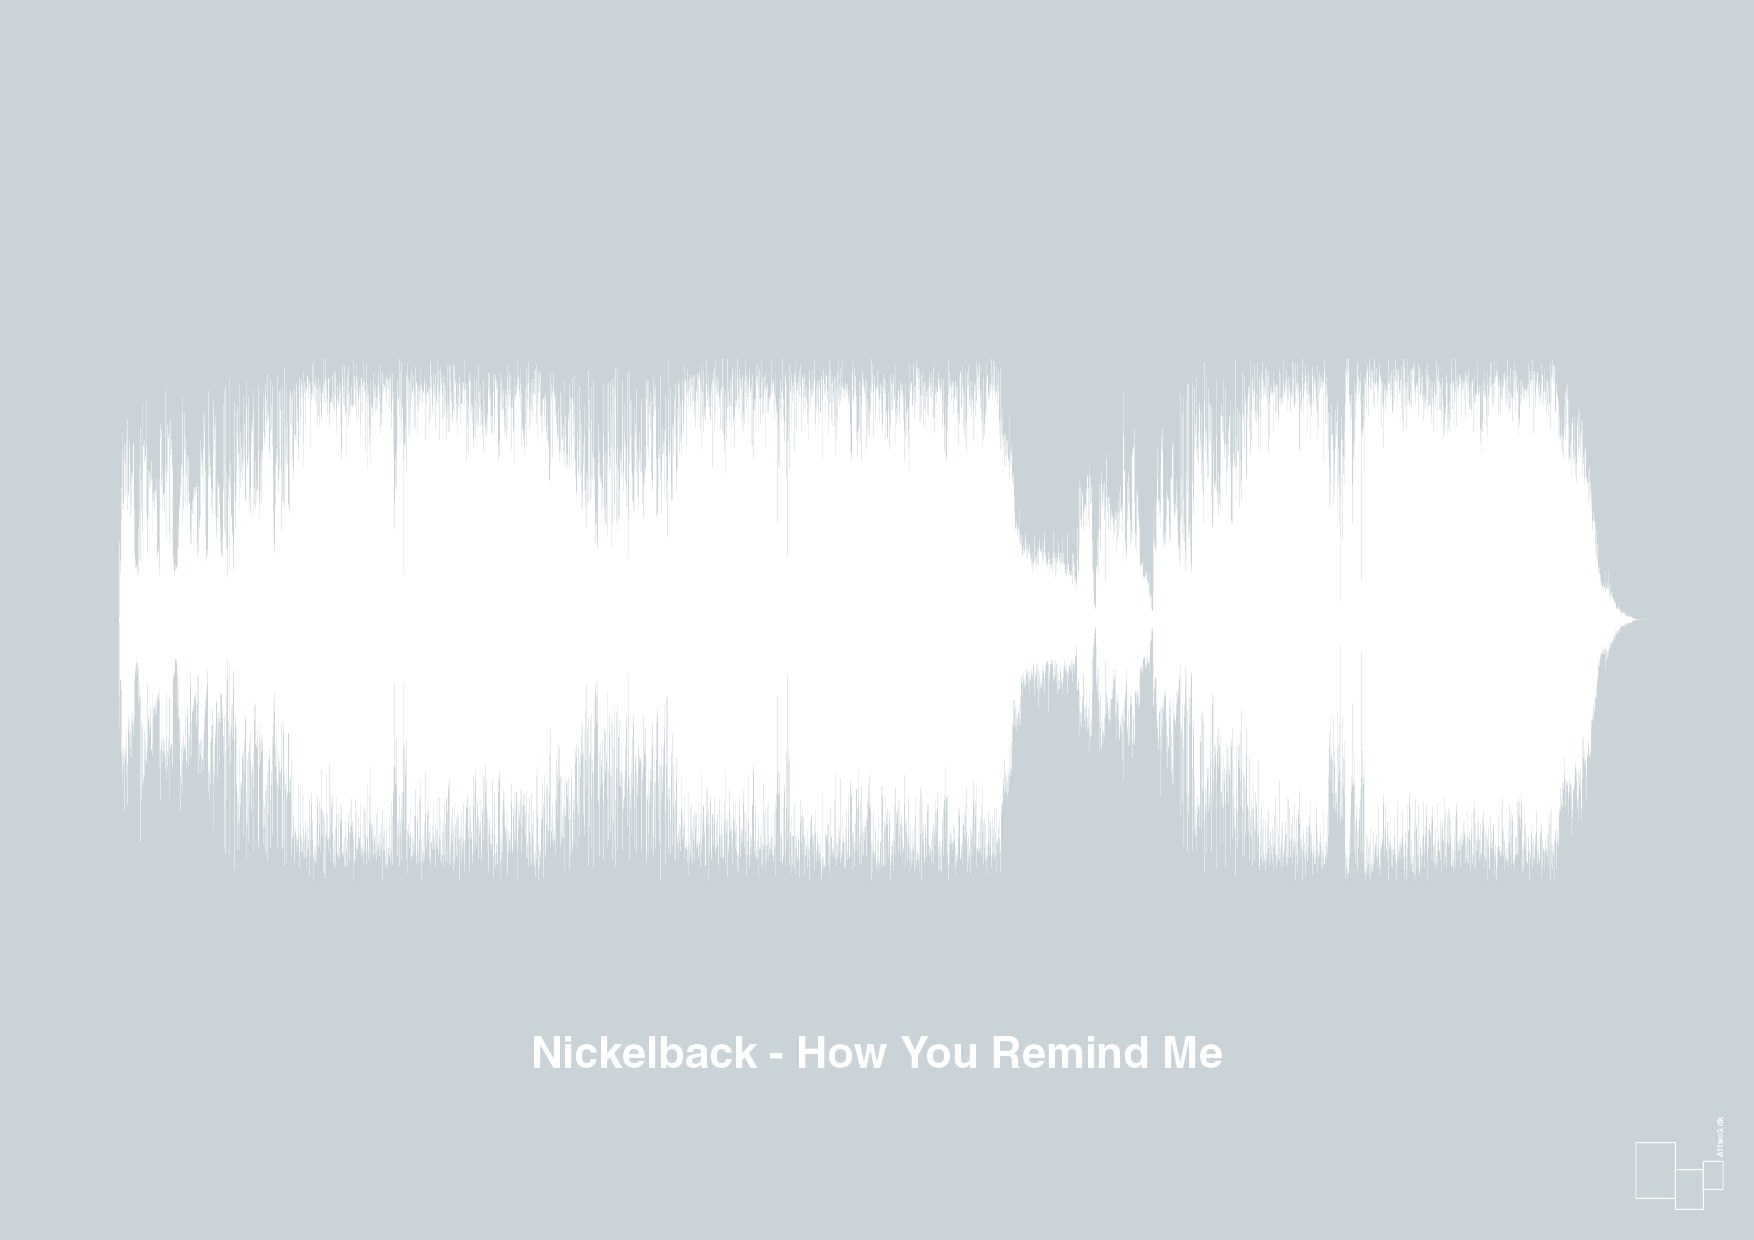 nickelback - how you remind me - Plakat med Musik i Light Drizzle